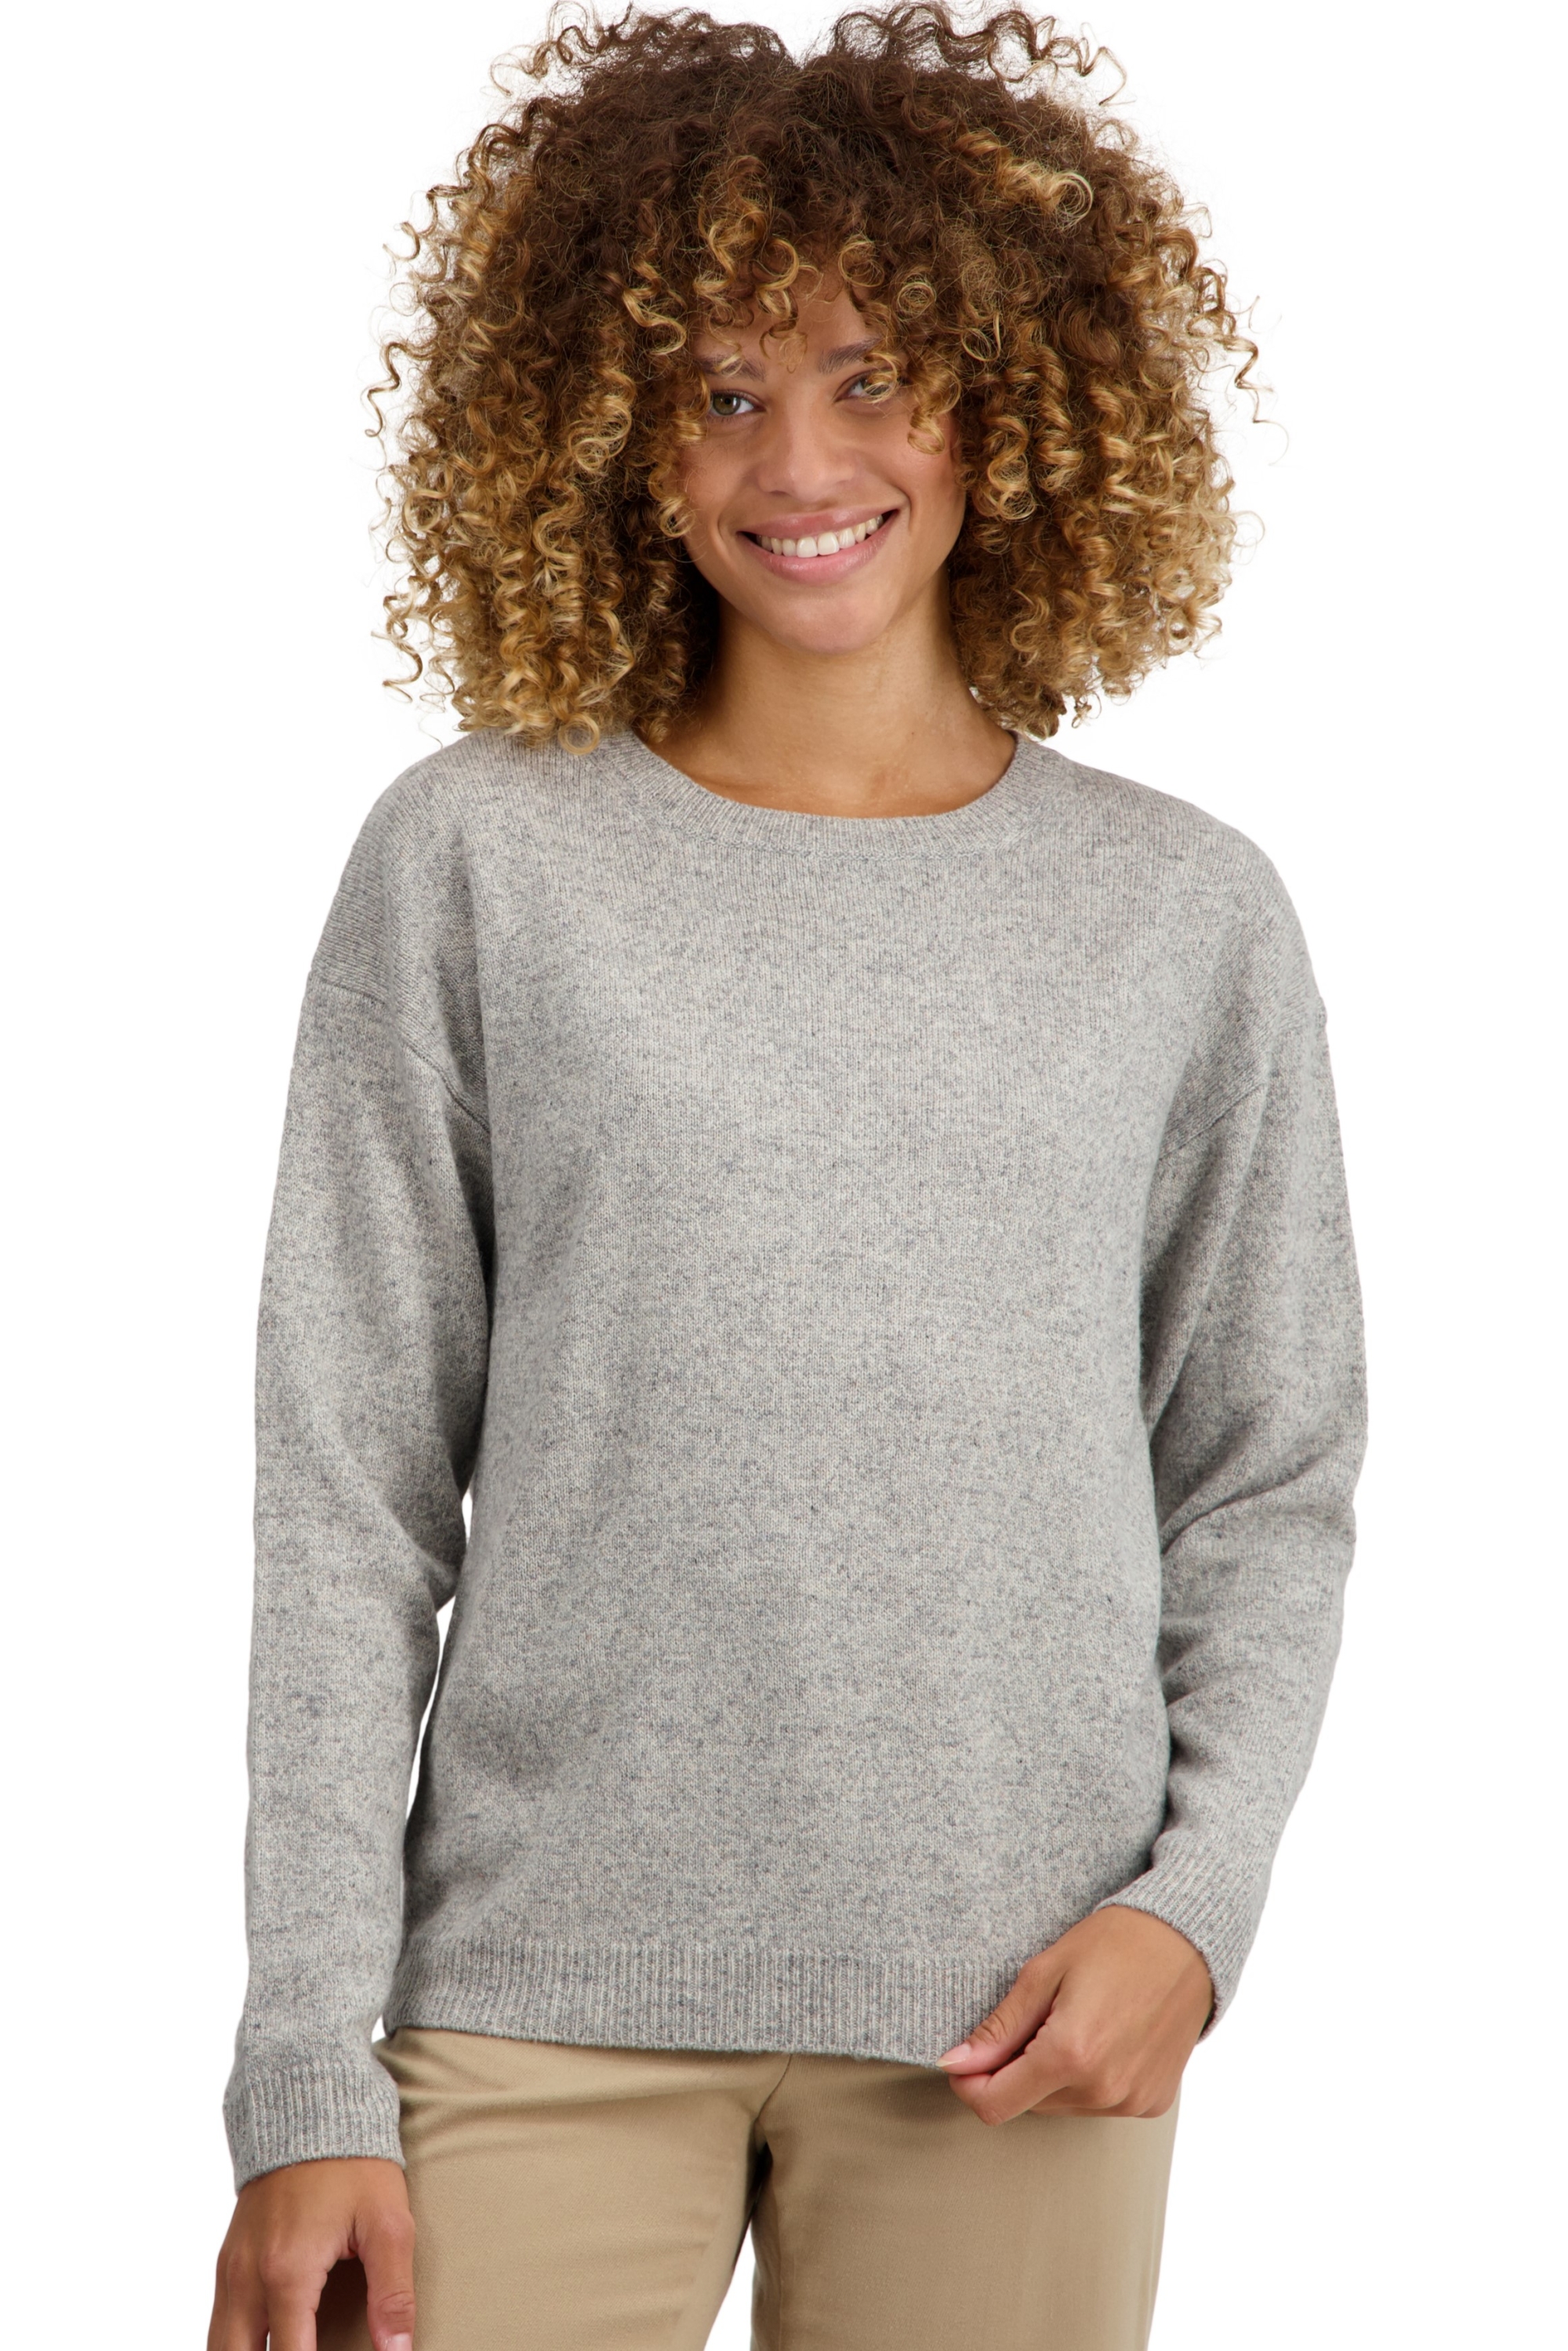 Chameau pull femme thelma pierre s